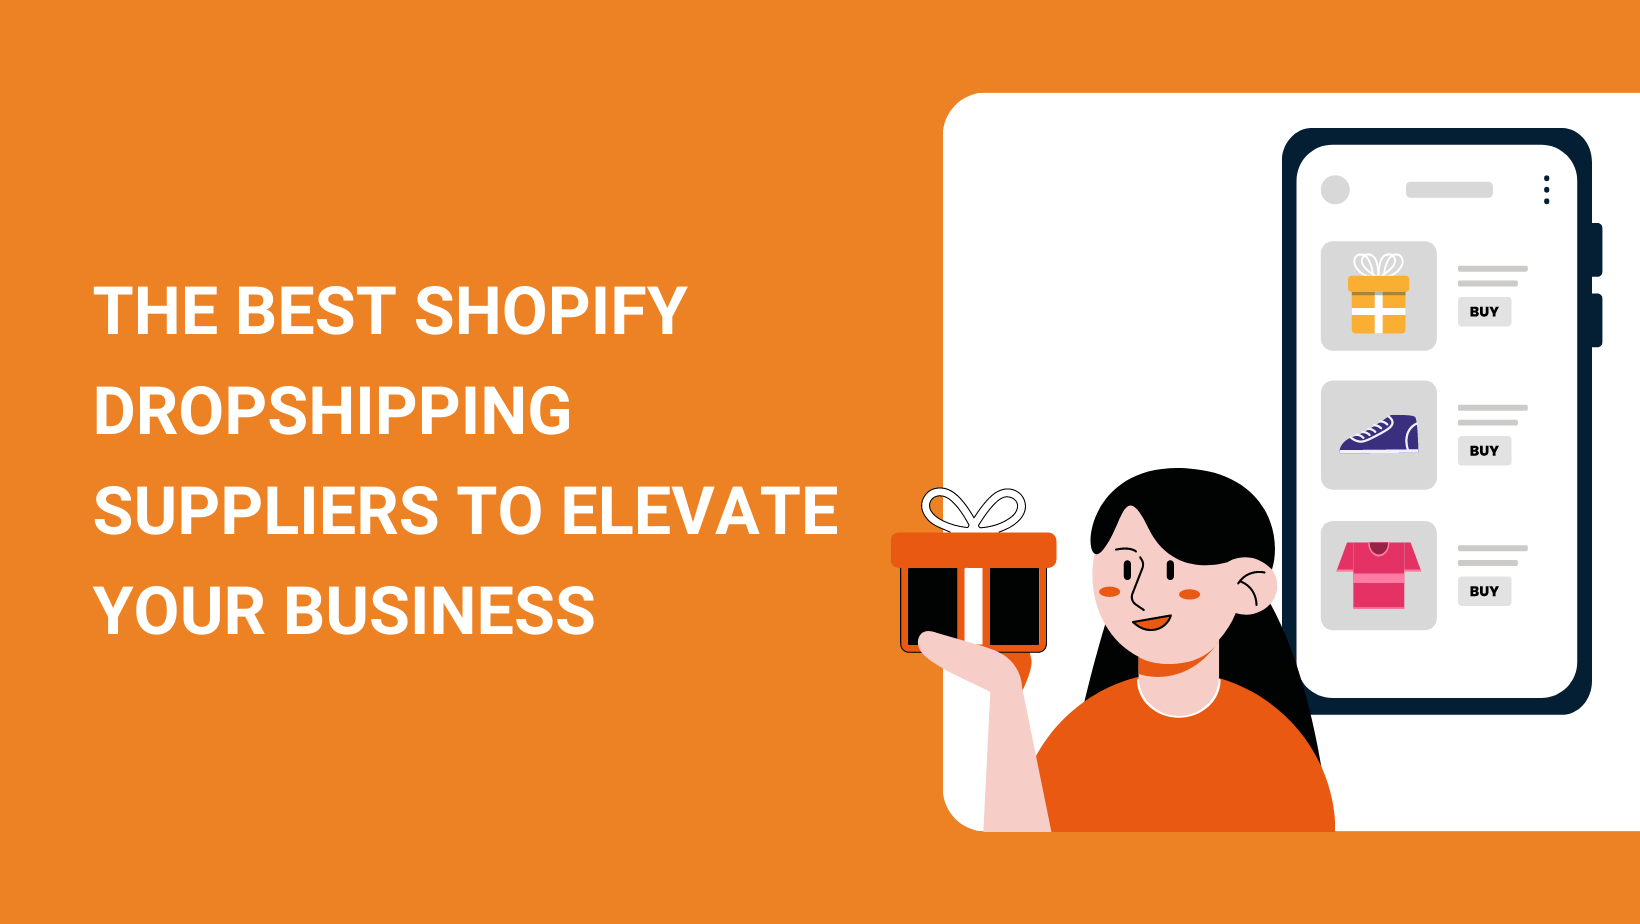 THE BEST SHOPIFY DROPSHIPPING SUPPLIERS TO ELEVATE YOUR BUSINESS